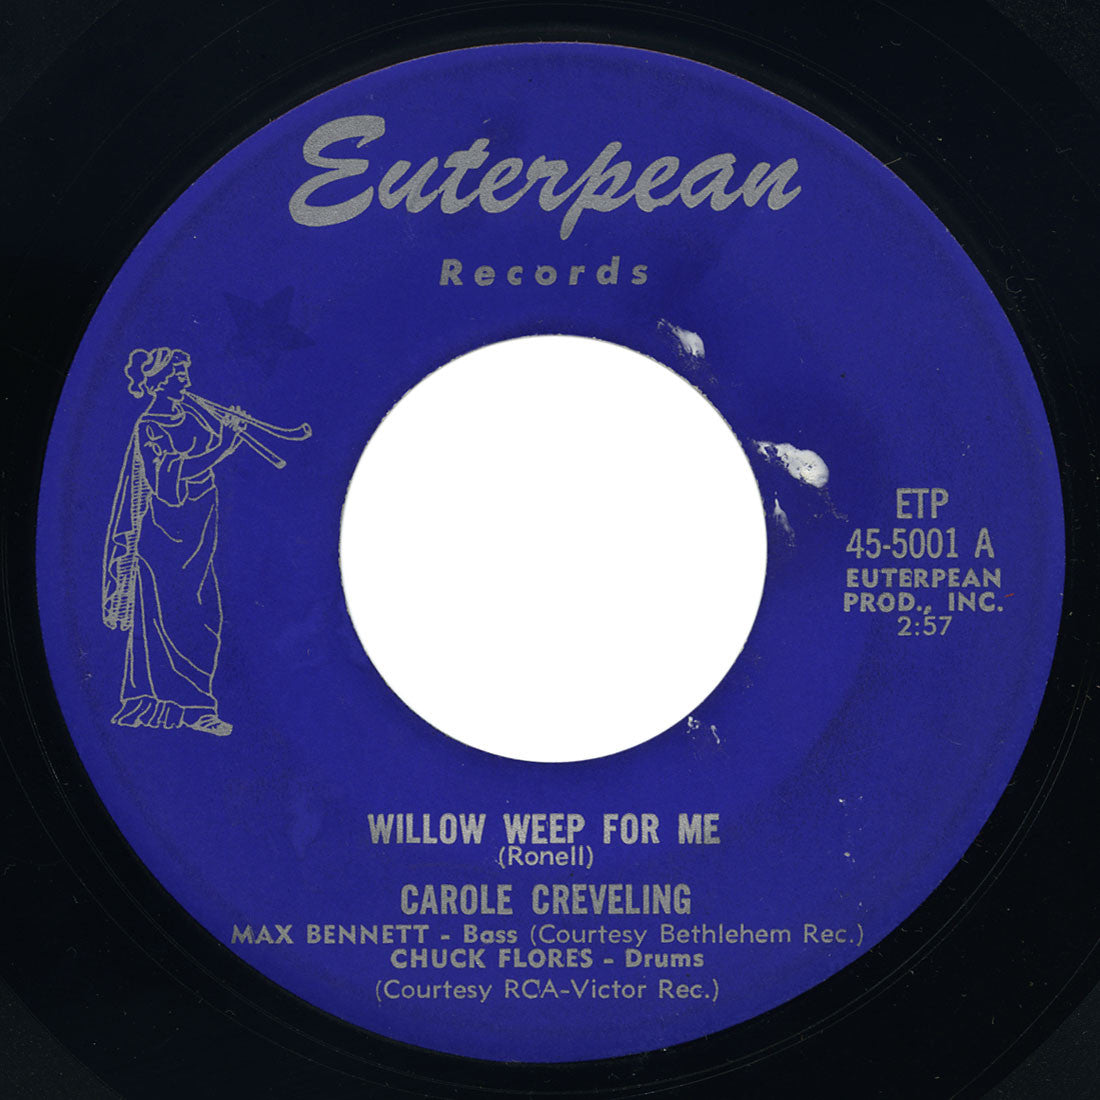 Carole Creveling – Willow Weep For Me